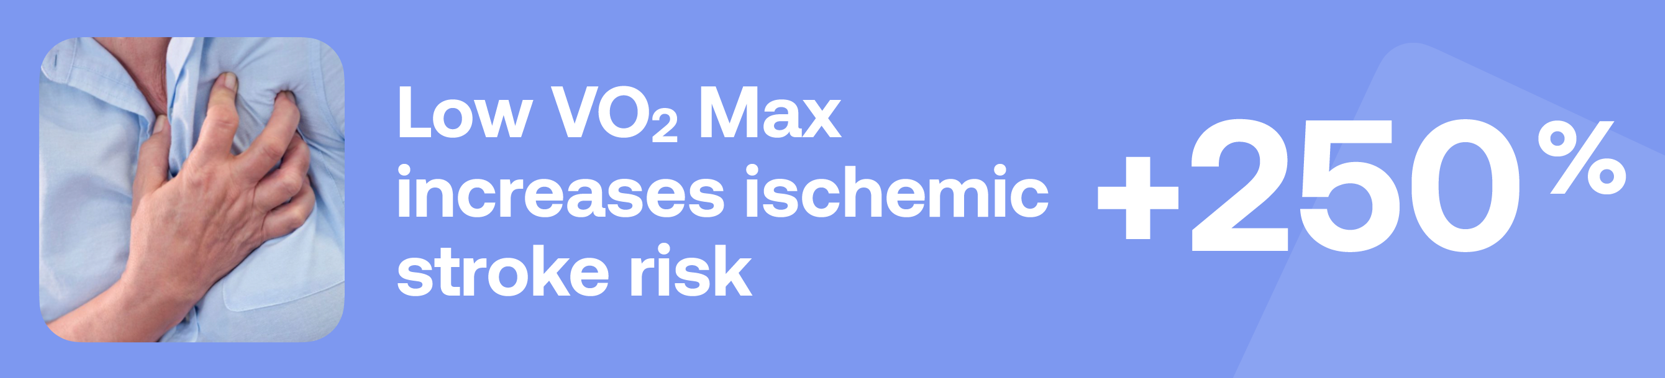 Low VO₂ Max increases ischemic stroke risk +250%